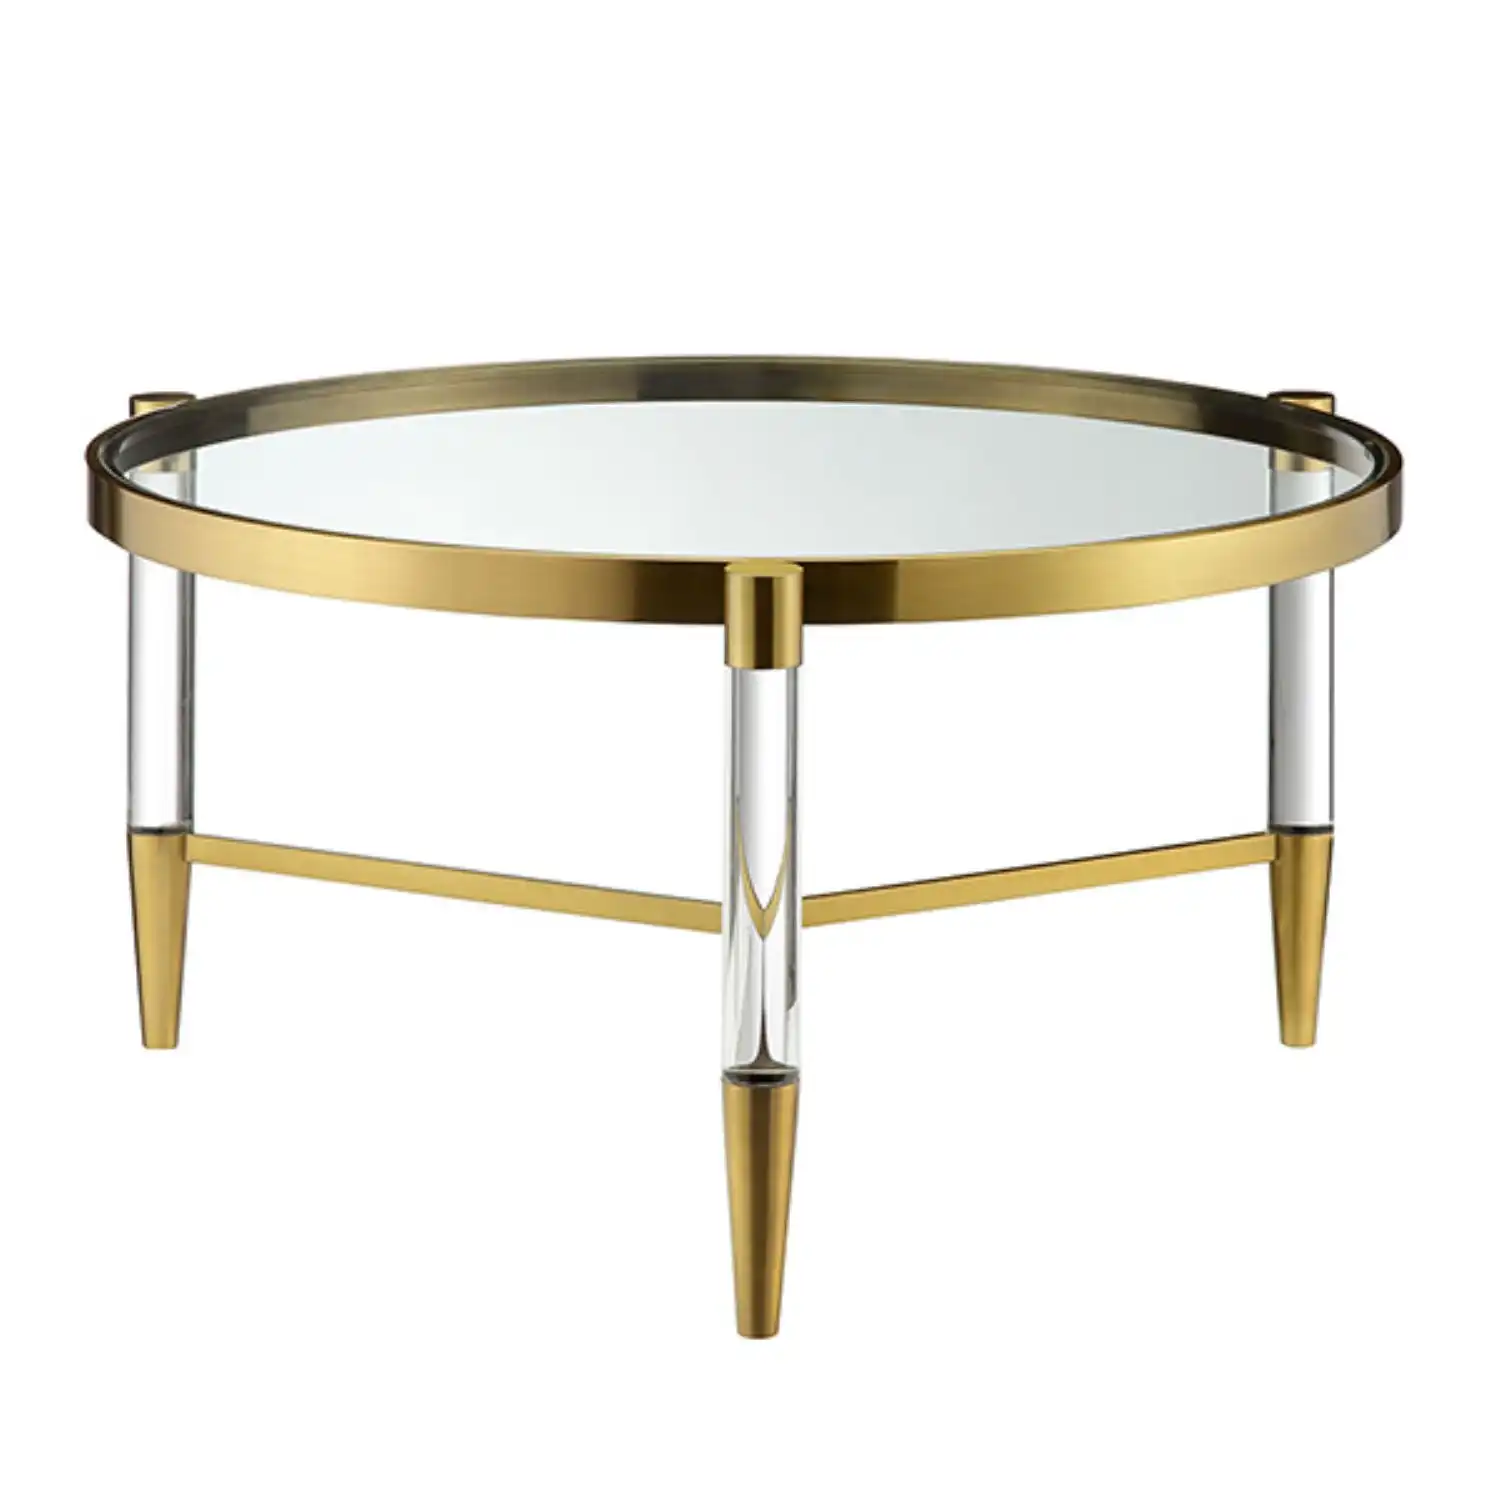 Gold and Silver Metal Round Coffee Table with Glass Top